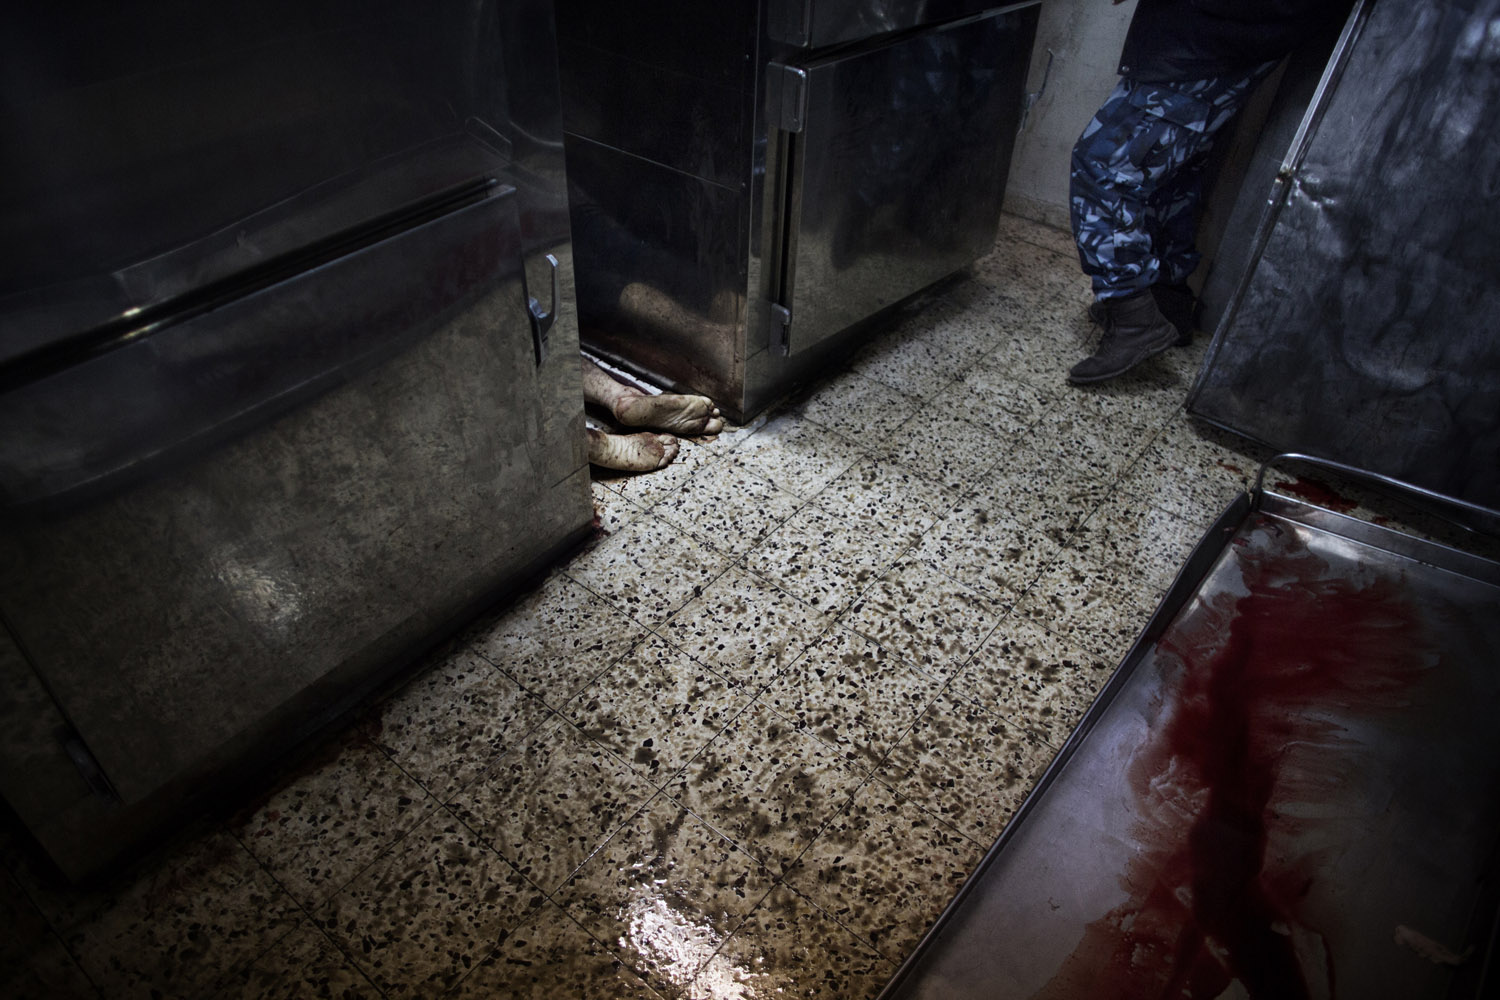 Nov. 20, 2012. The body of an alleged collaborator lies in between fridges inside hospital morgue in Gaza City. Gunmen executed six suspected collaborators and pinned notices to their bodies saying they had been killed by Hamas's armed wing, witnesses told AFP.